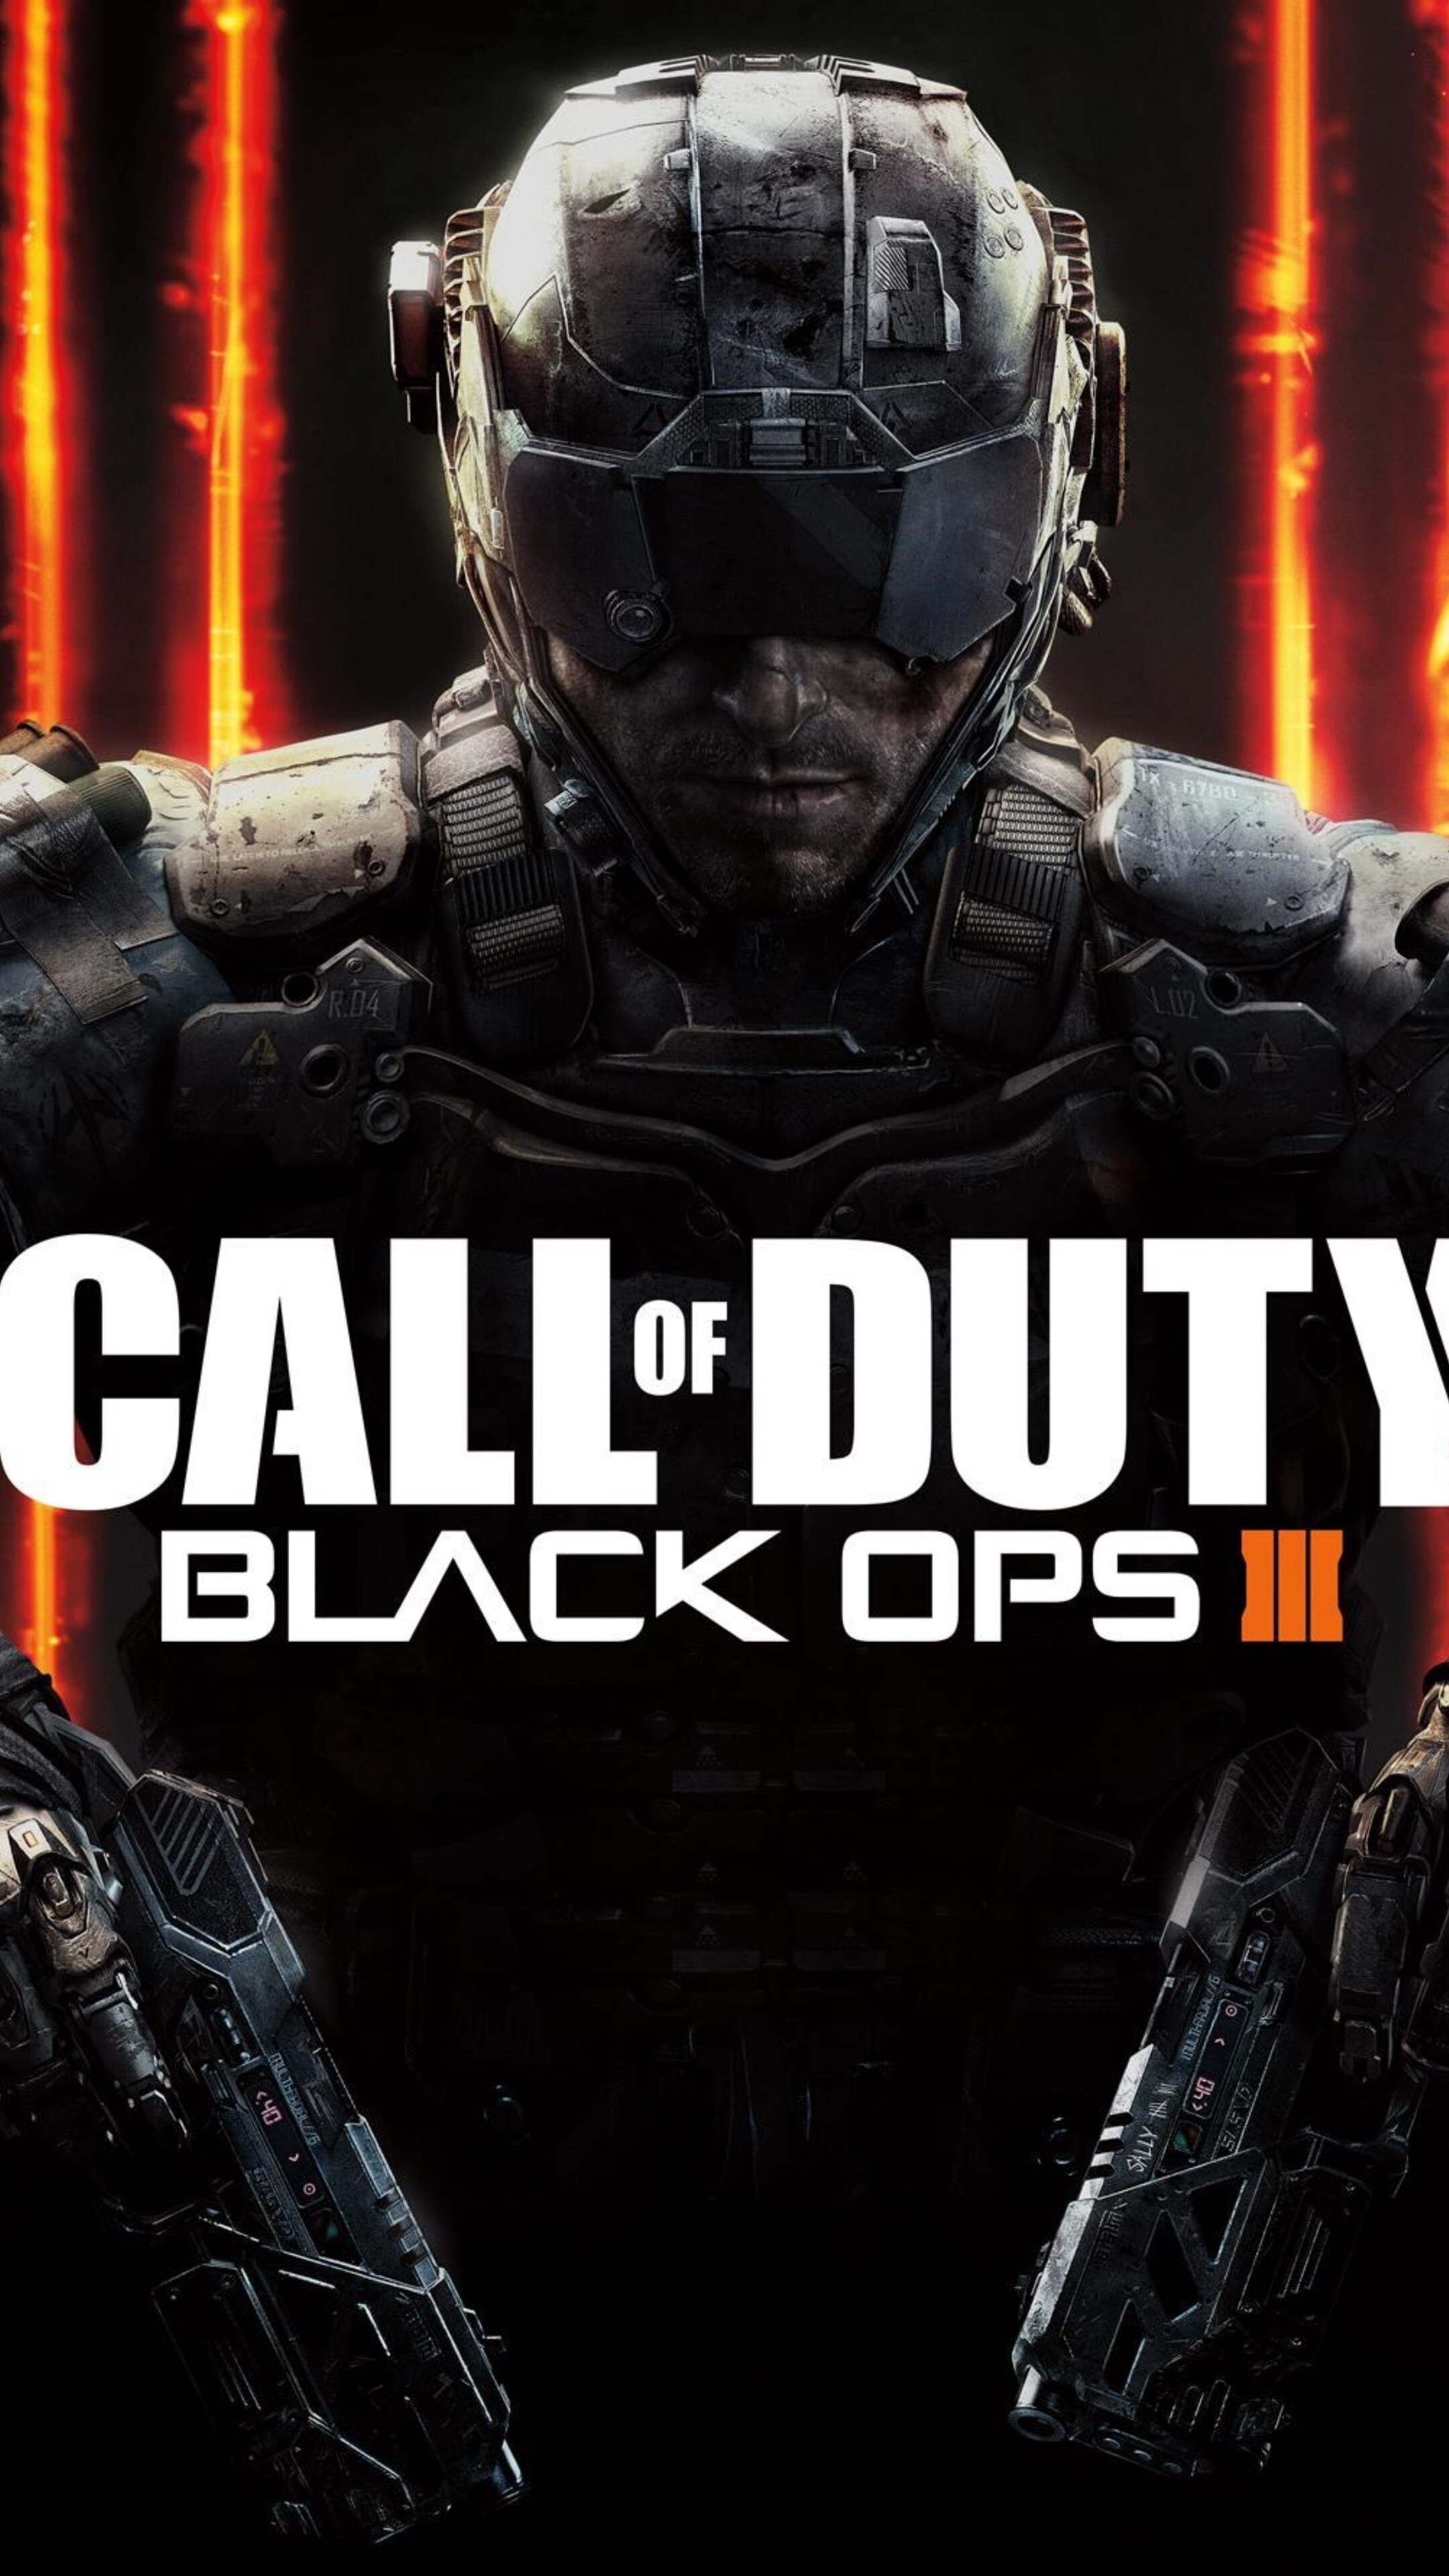 Call of duty 3 mobile. Black ops 3. Cod Black ops 3. Call of Duty 3 Постер. Call of Duty ops 3.